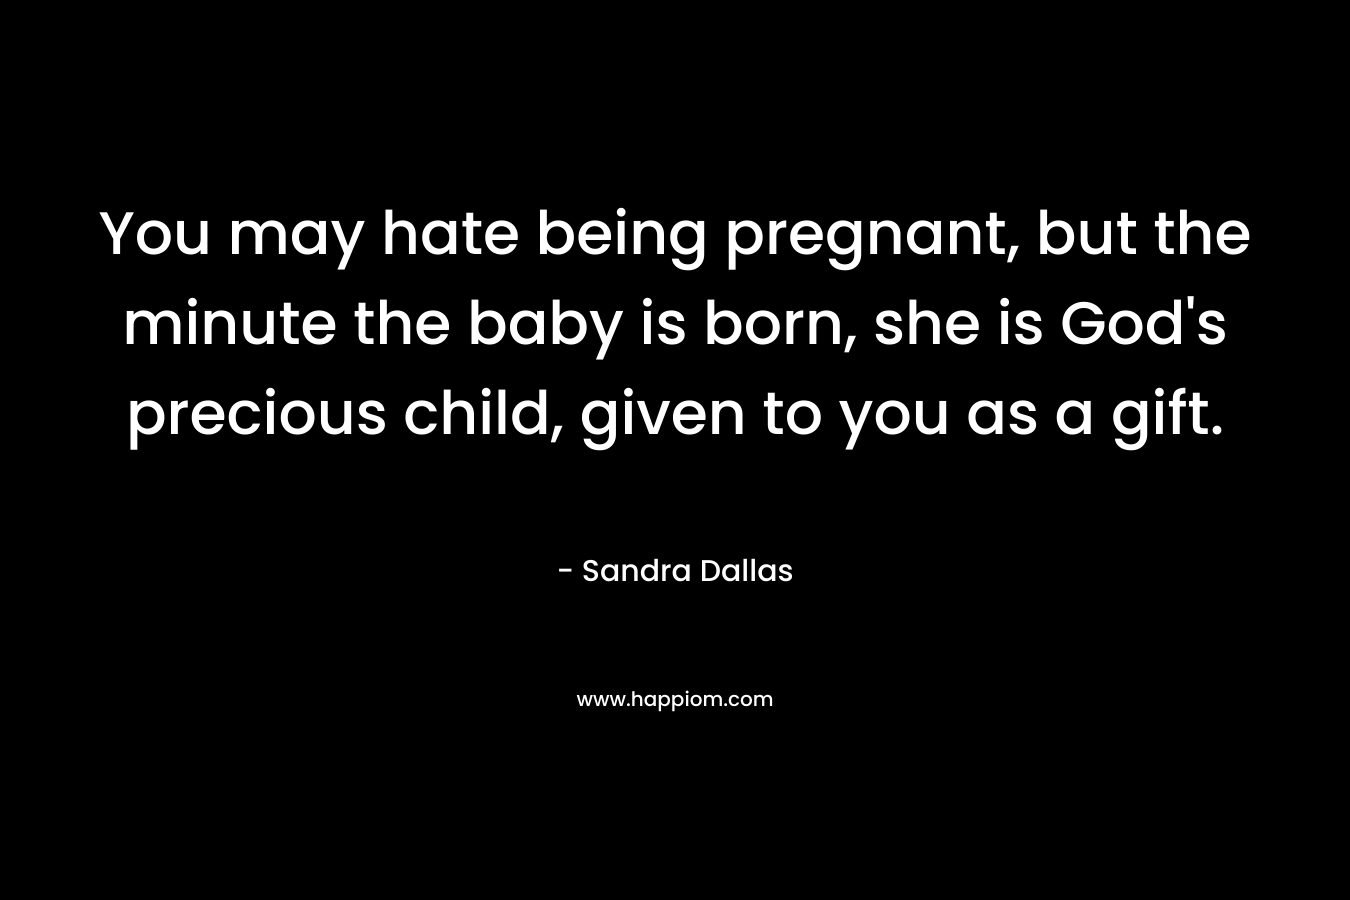 You may hate being pregnant, but the minute the baby is born, she is God's precious child, given to you as a gift.